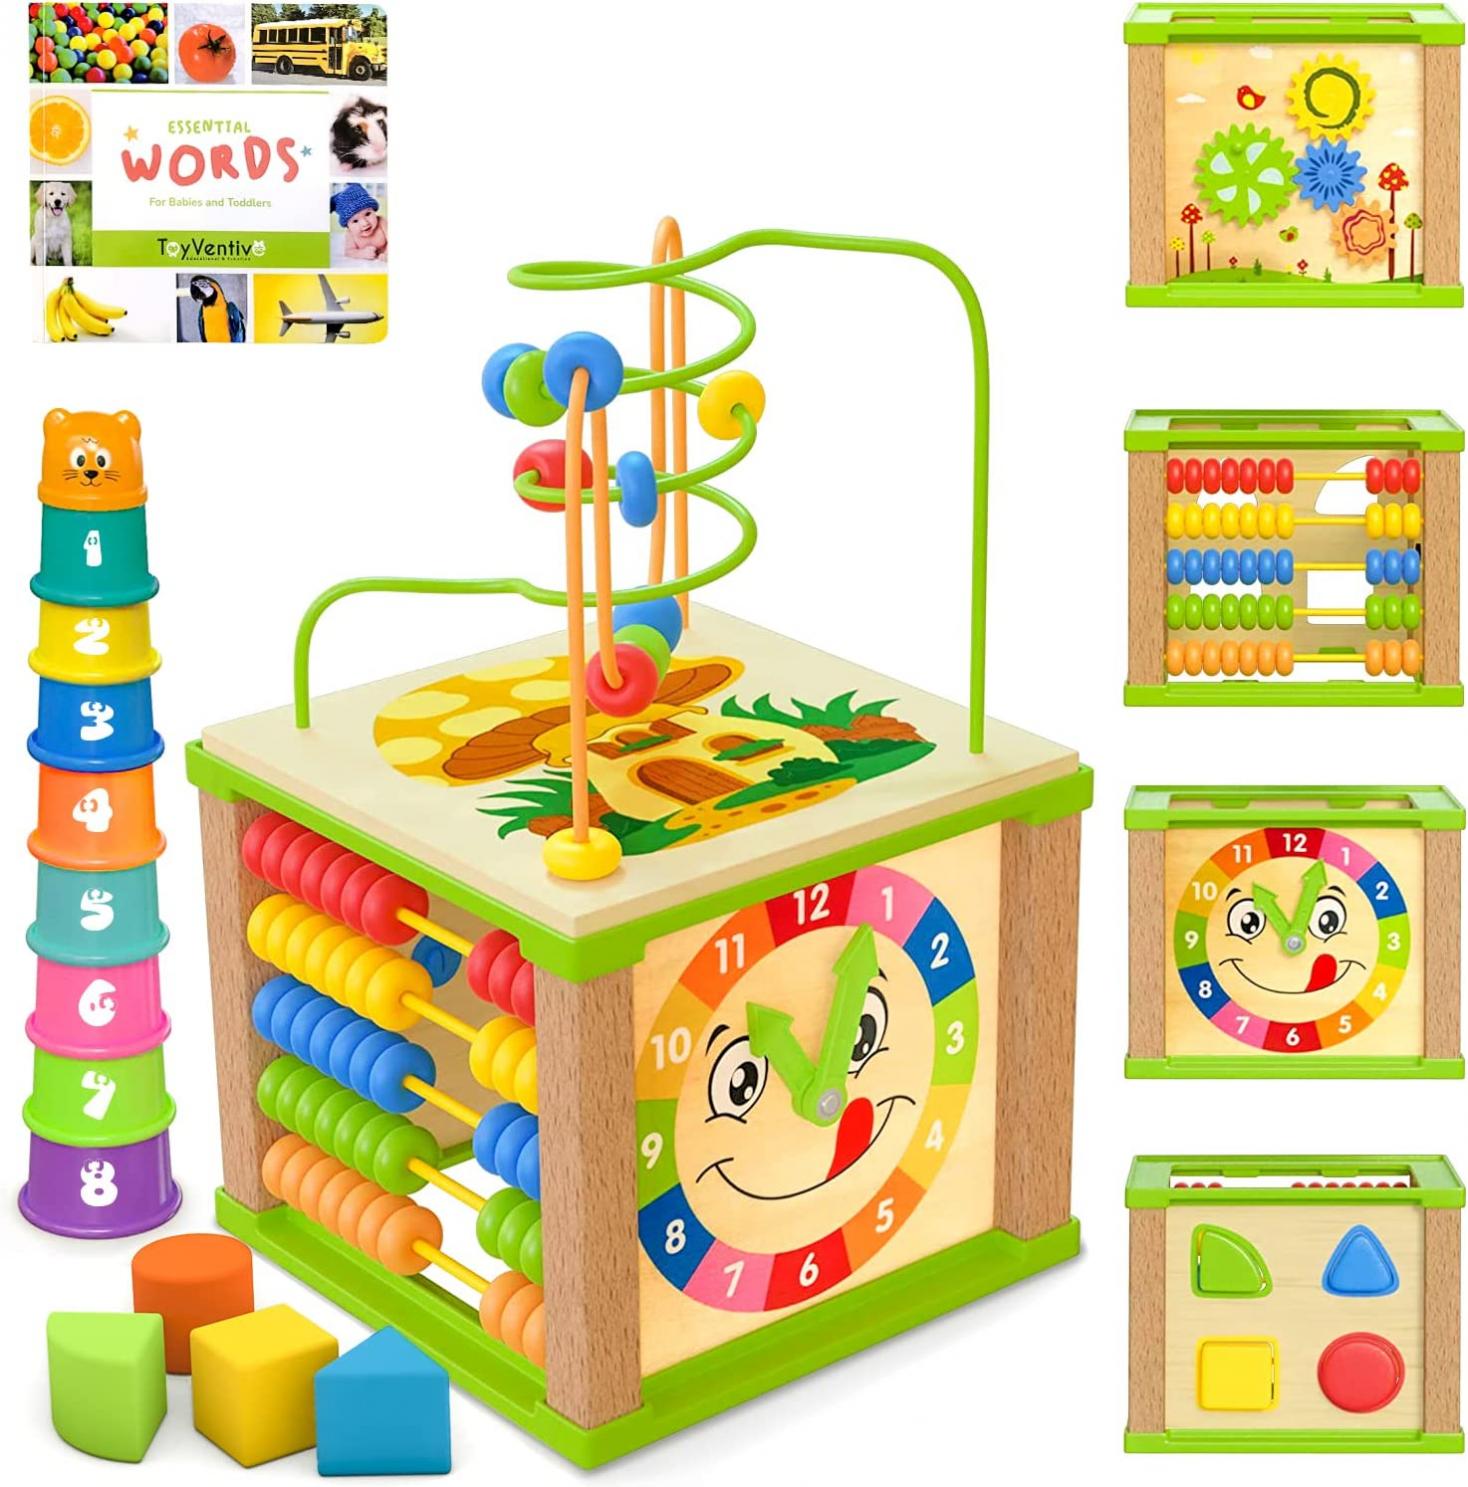 TOYVENTIVE Wooden Kids Baby Activity Cube - Boys Gift Set | One 1, 2 Year Old Boy Gifts Toys | Developmental Toddler Educational Learning Boy Toys 12-18 Months | Bead Maze, First Birthday Gift